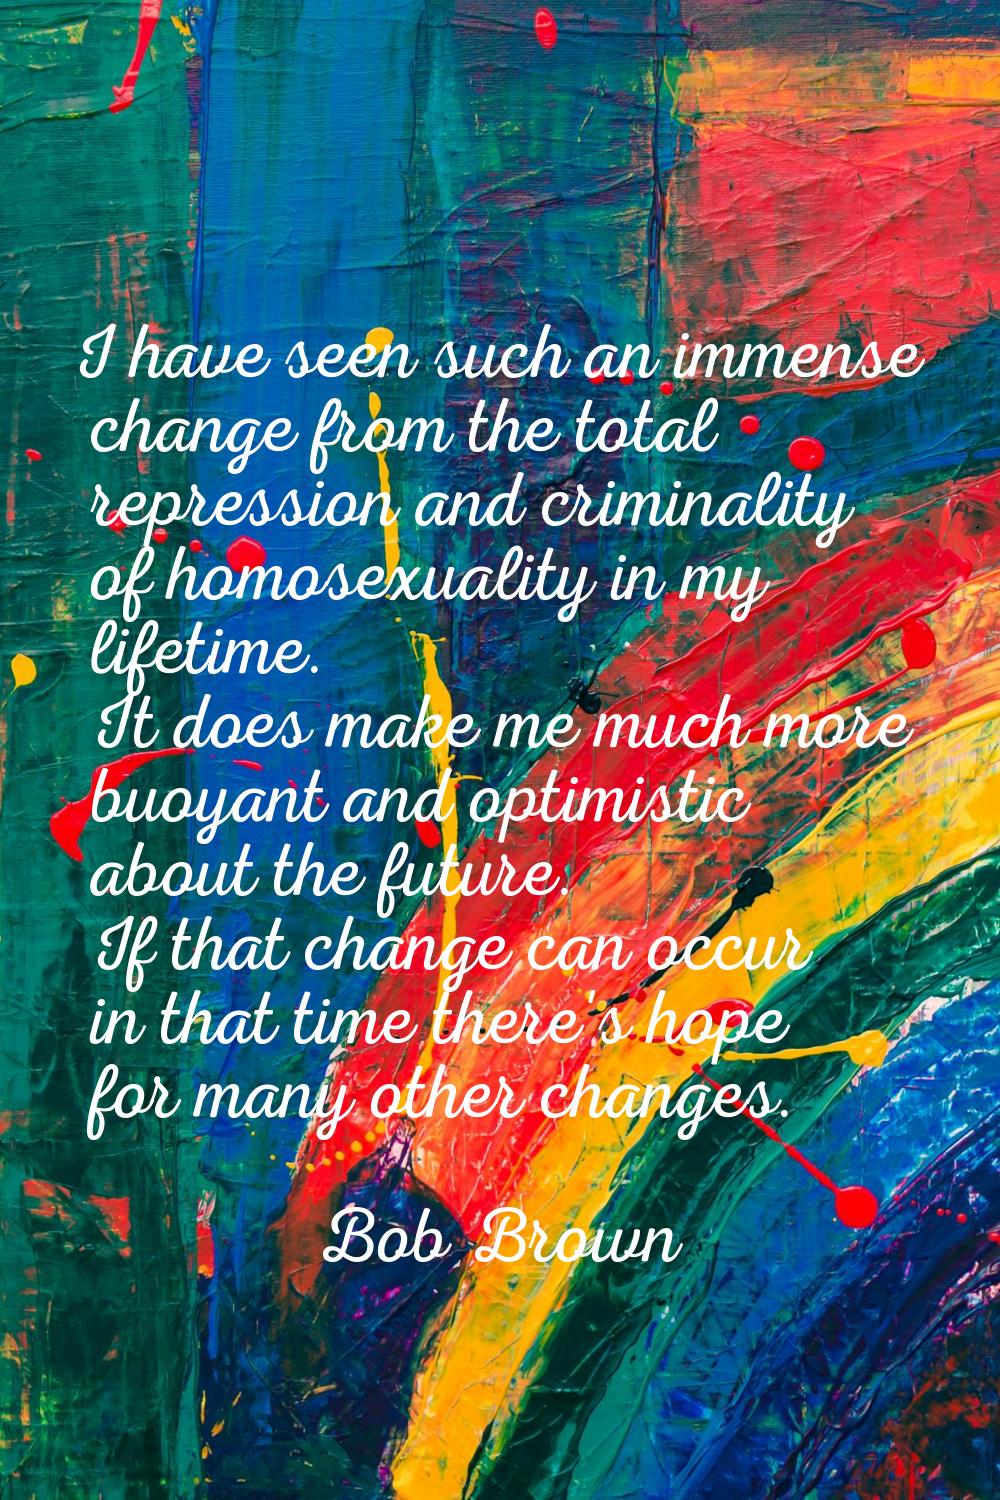 I have seen such an immense change from the total repression and criminality of homosexuality in my